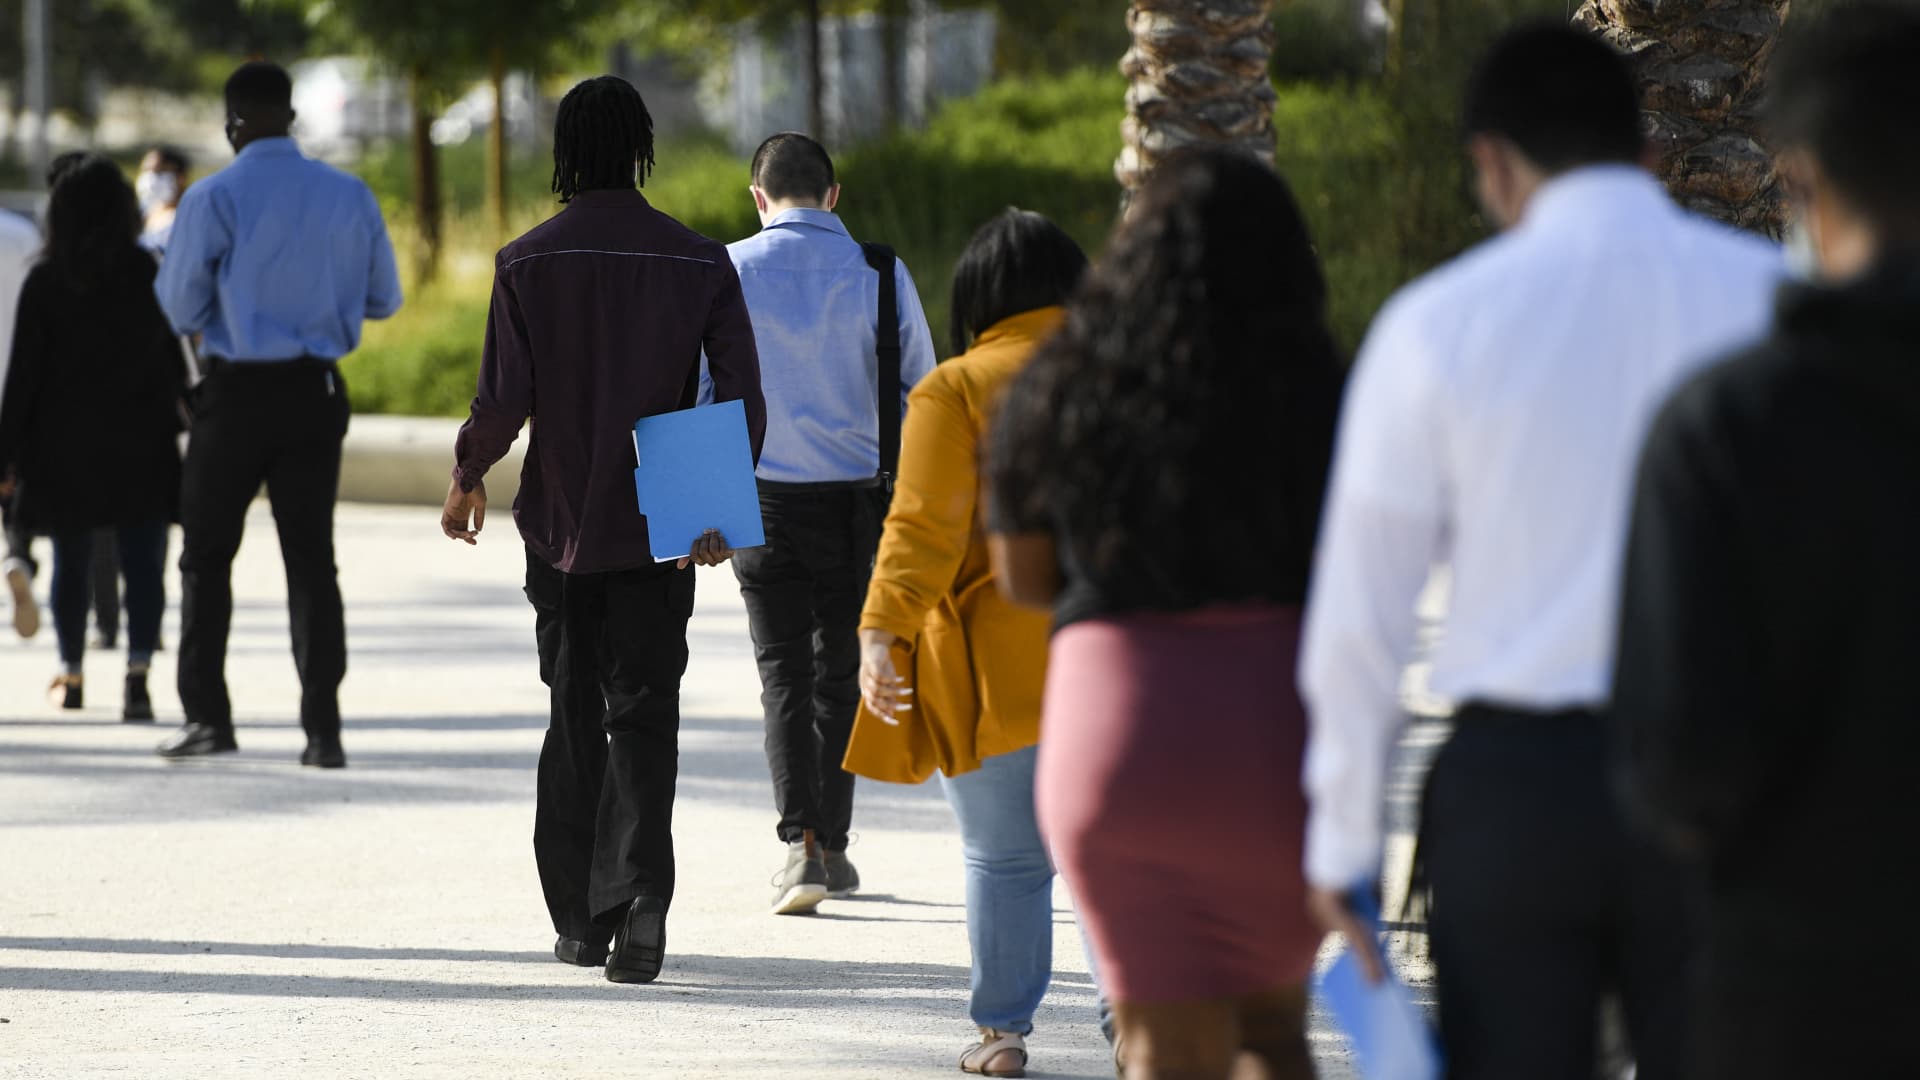 People wait in line to attend a job fair at SoFi Stadium on Sept. 9, 2021, in Inglewood, California.